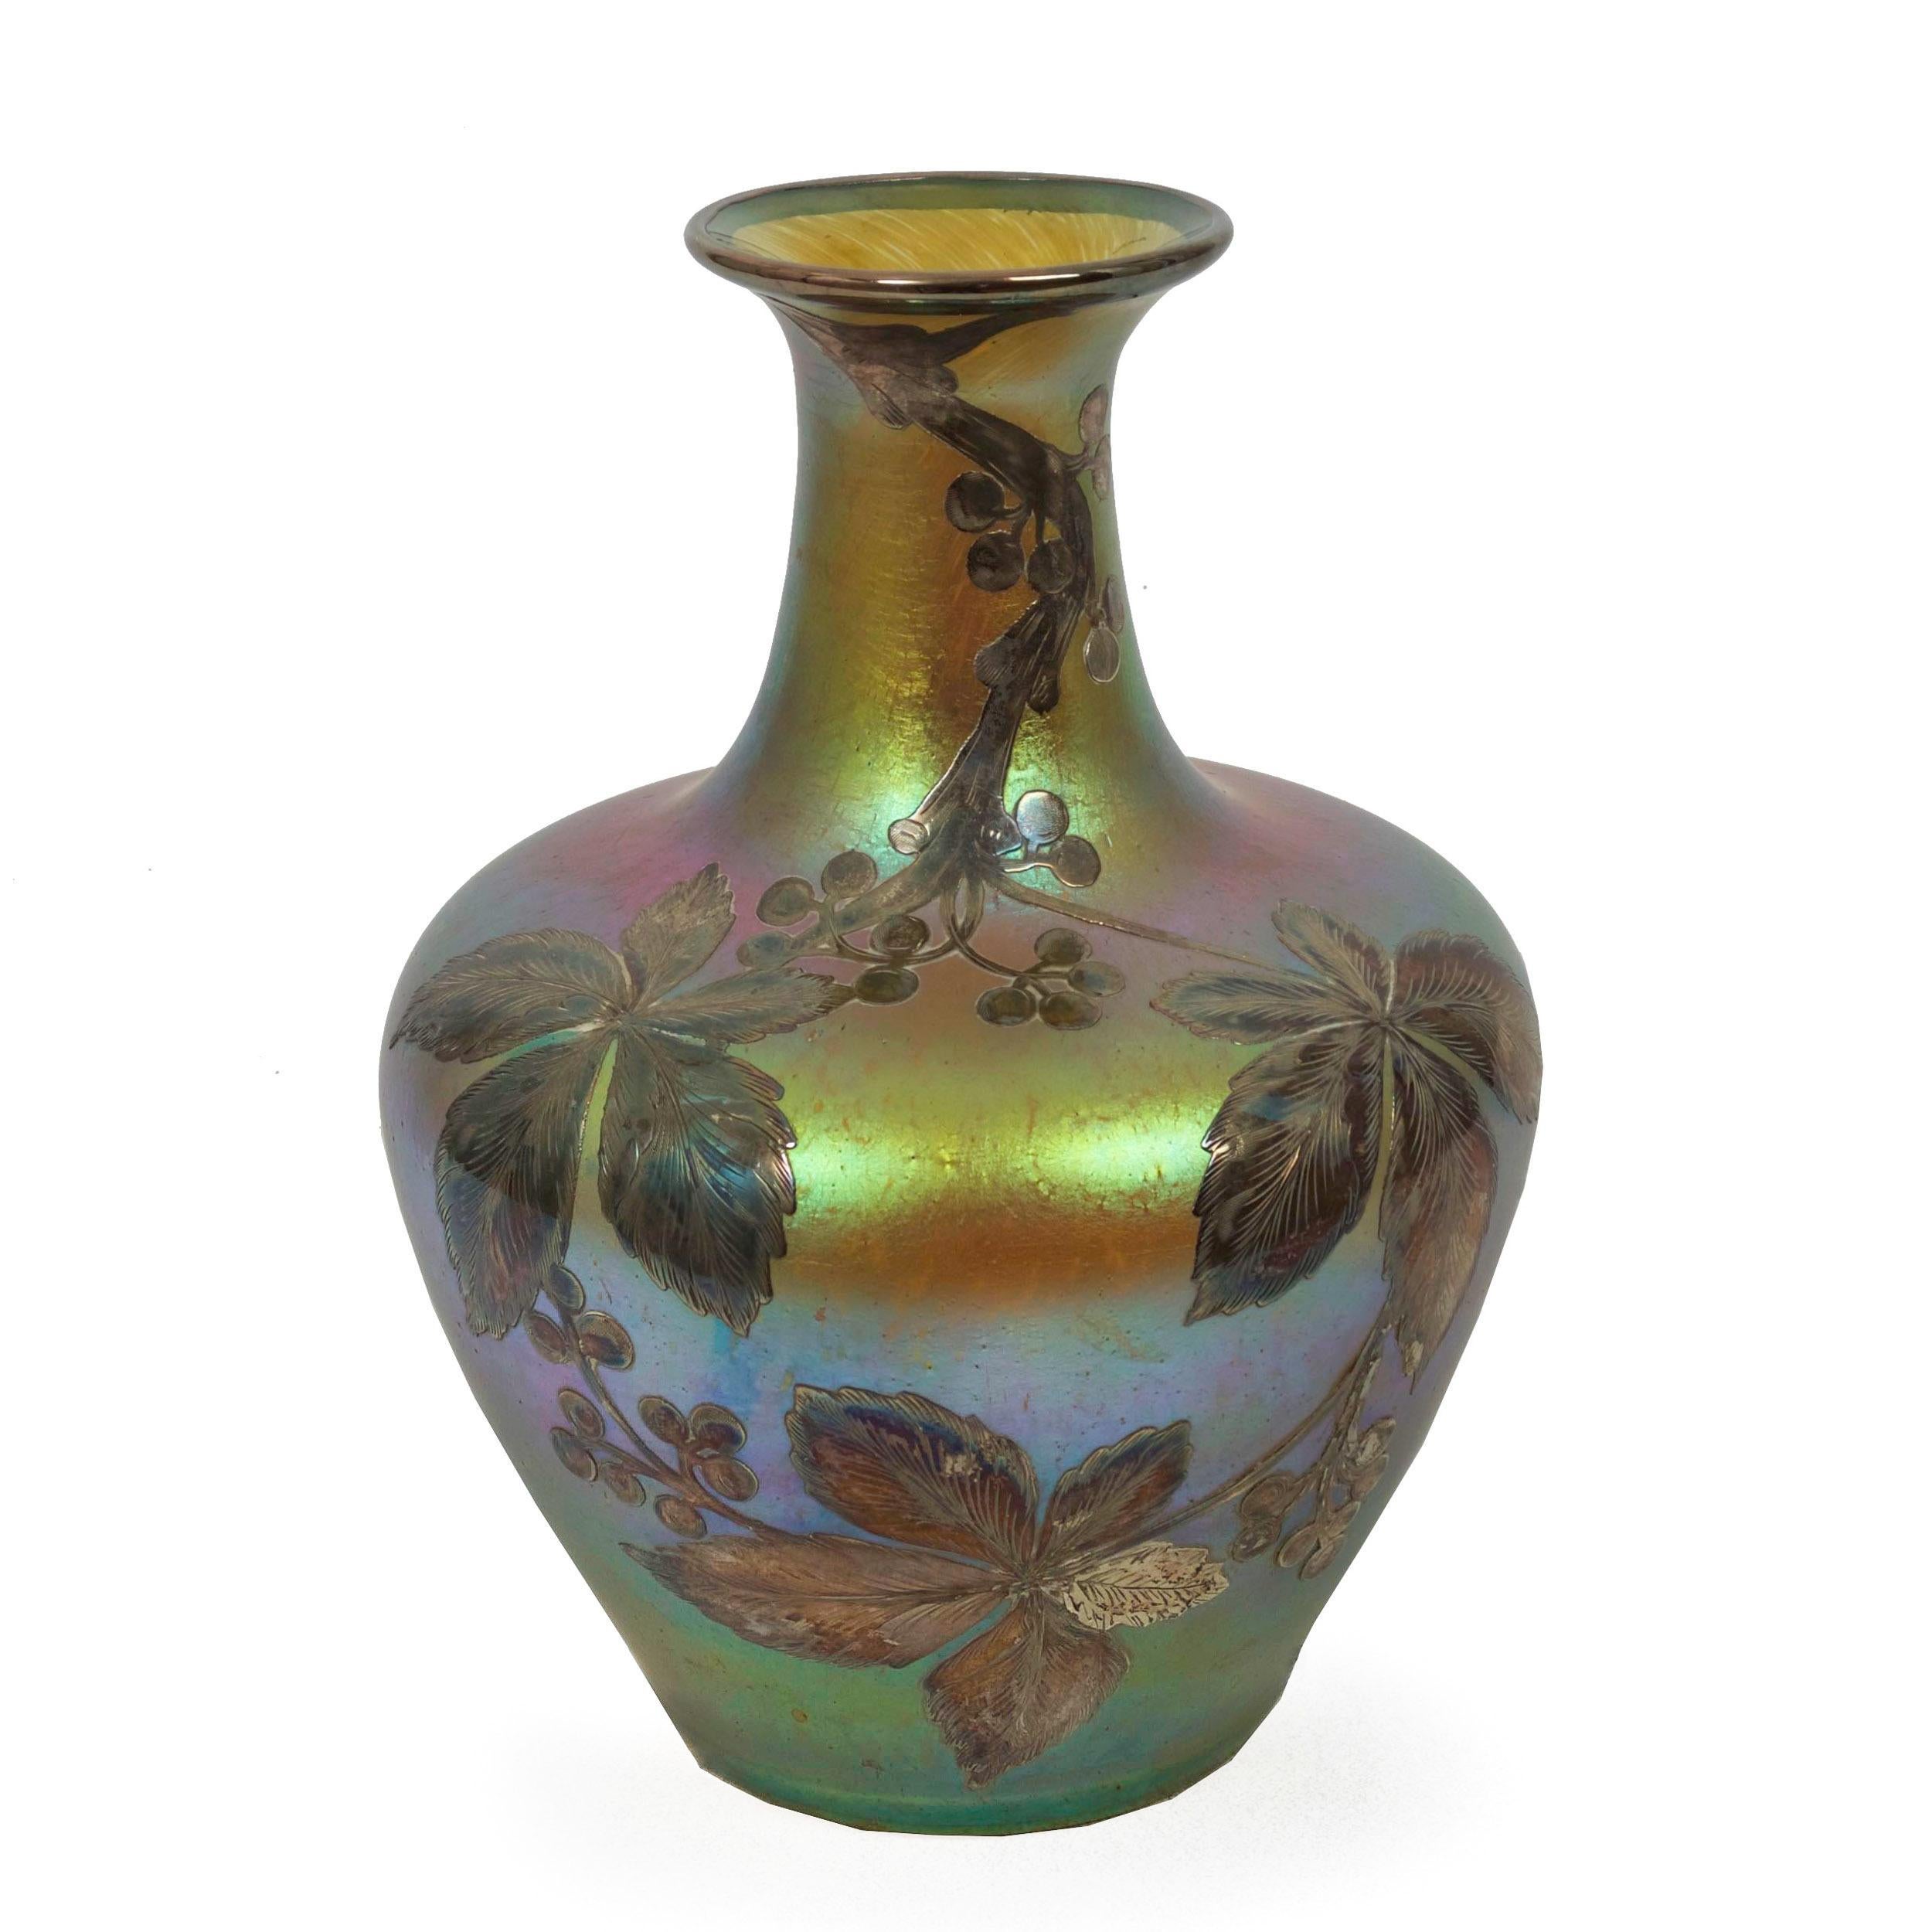 AUSTRIAN IRIDESCENT GOLD, BLUE AND GREEN GLASS VASE WITH SILVER OVERLAY
